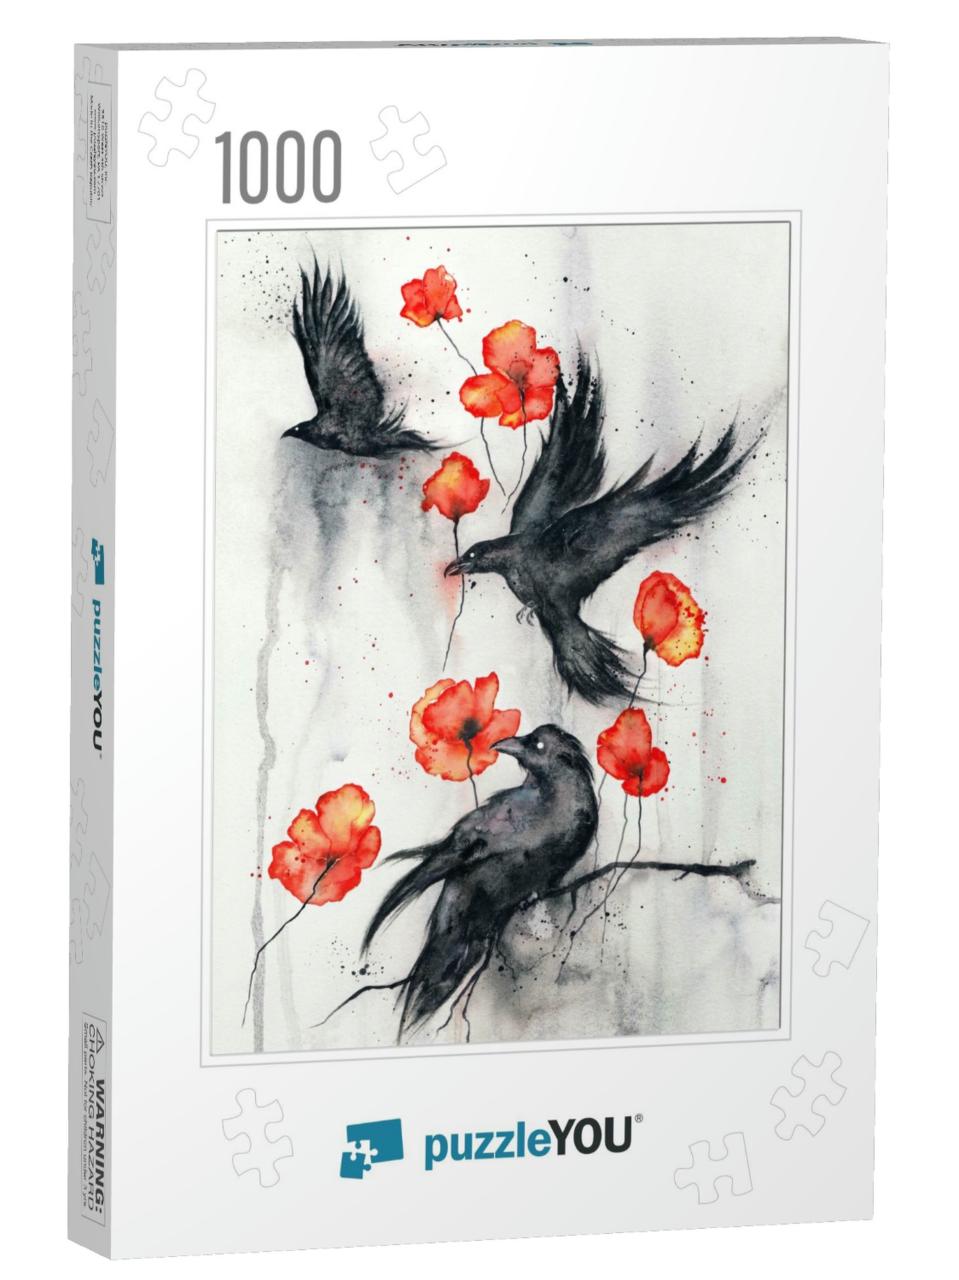 Black Ravens, Red Poppies & Rainy Watercolor Background... Jigsaw Puzzle with 1000 pieces